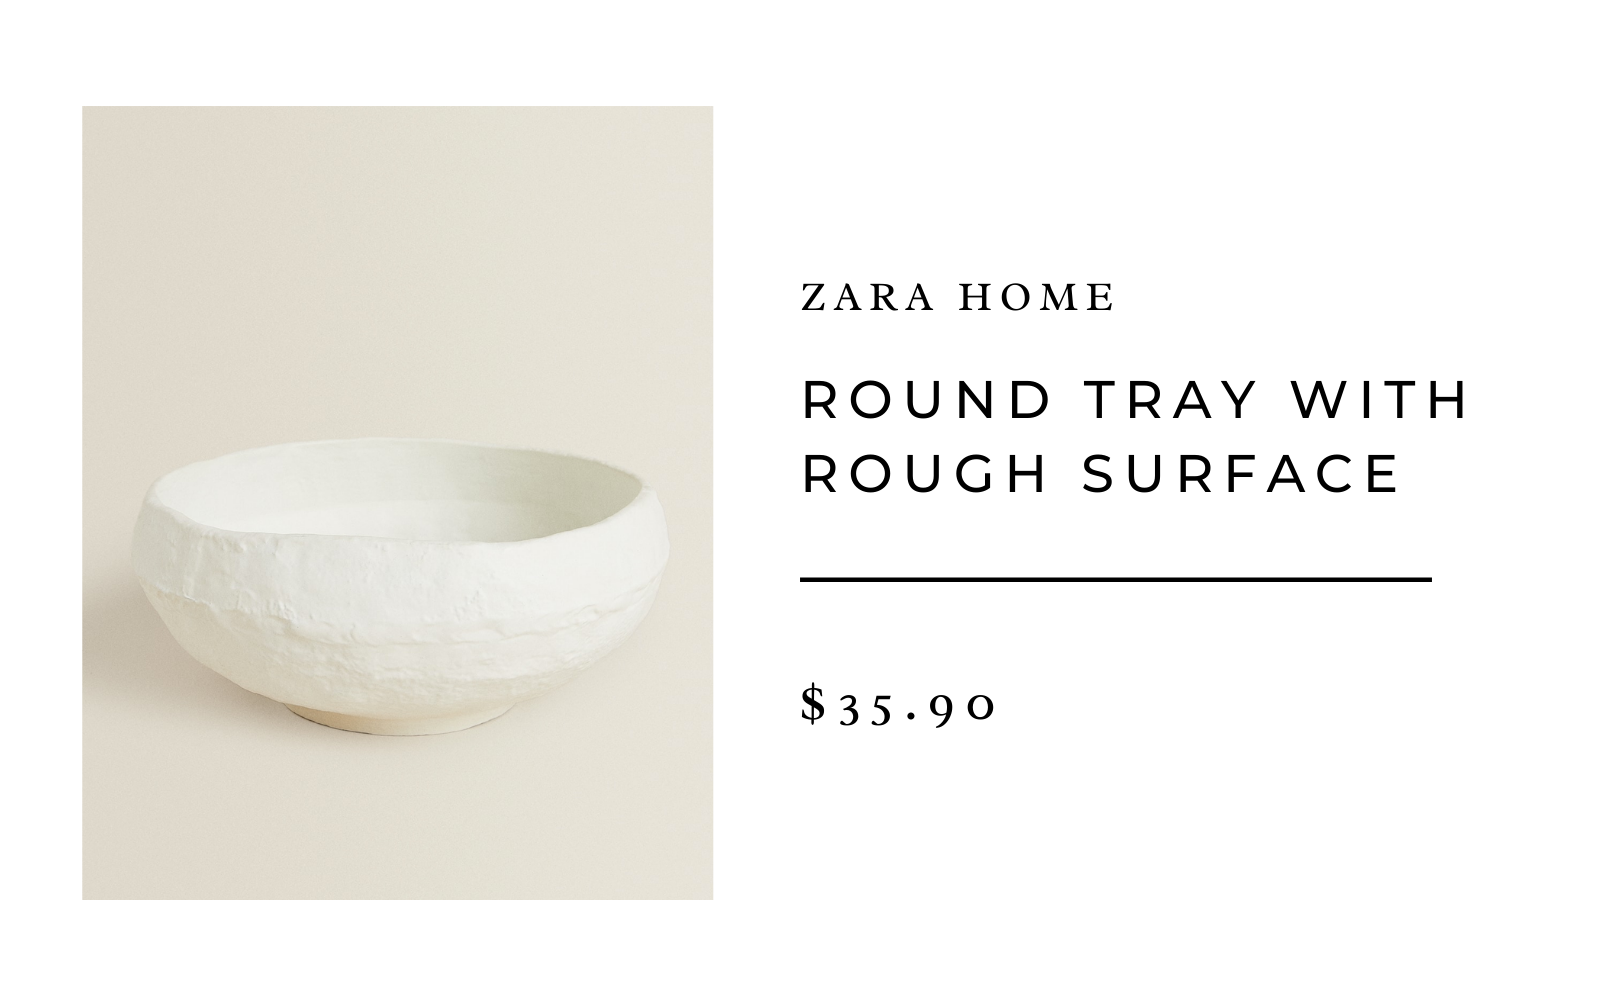 Zara Home Round Tray With Rough Surface